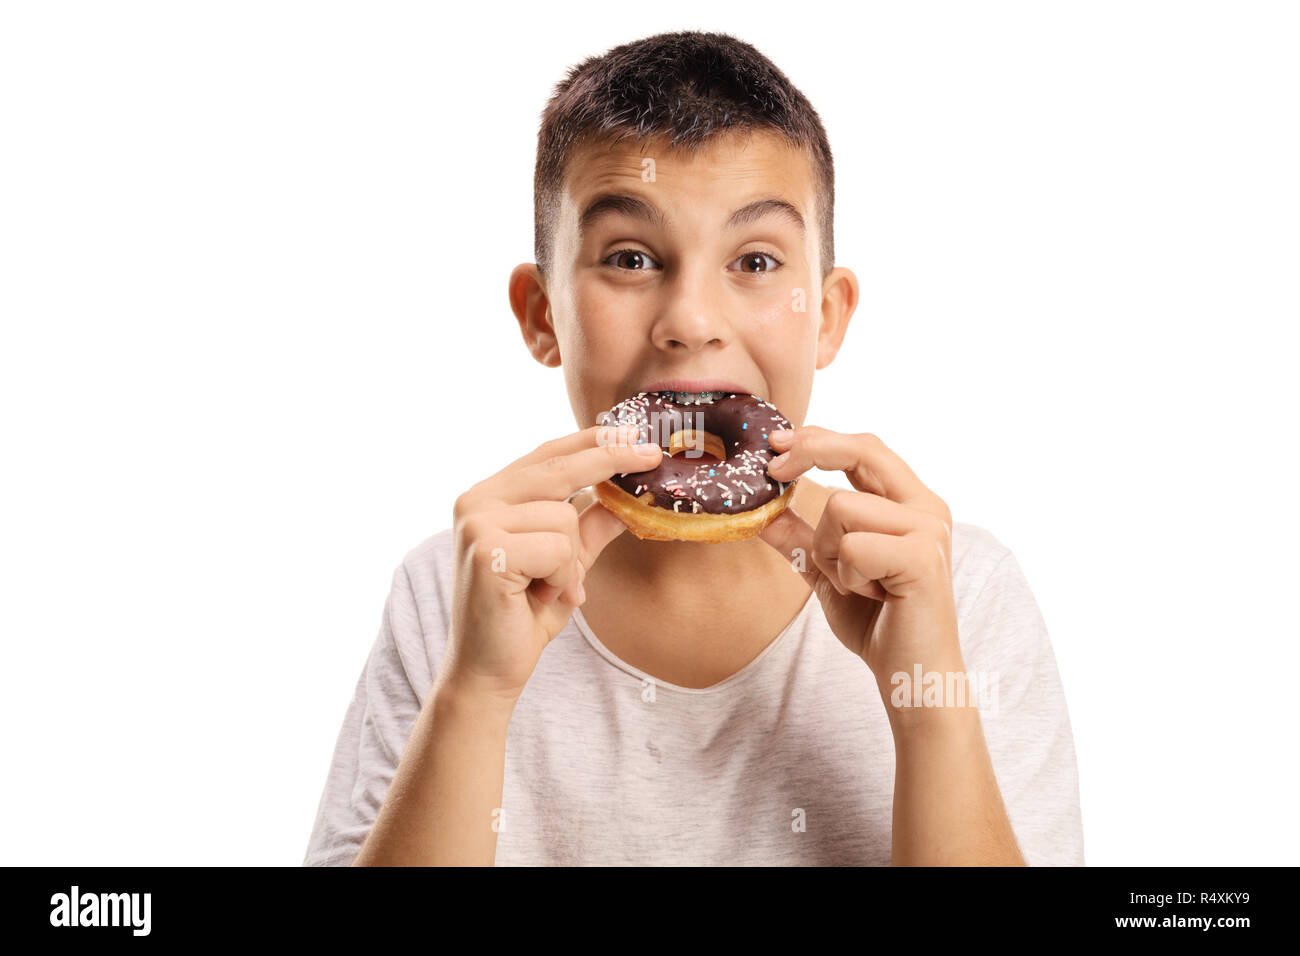 Young boy biting a donut isolated on white background Stock Photo